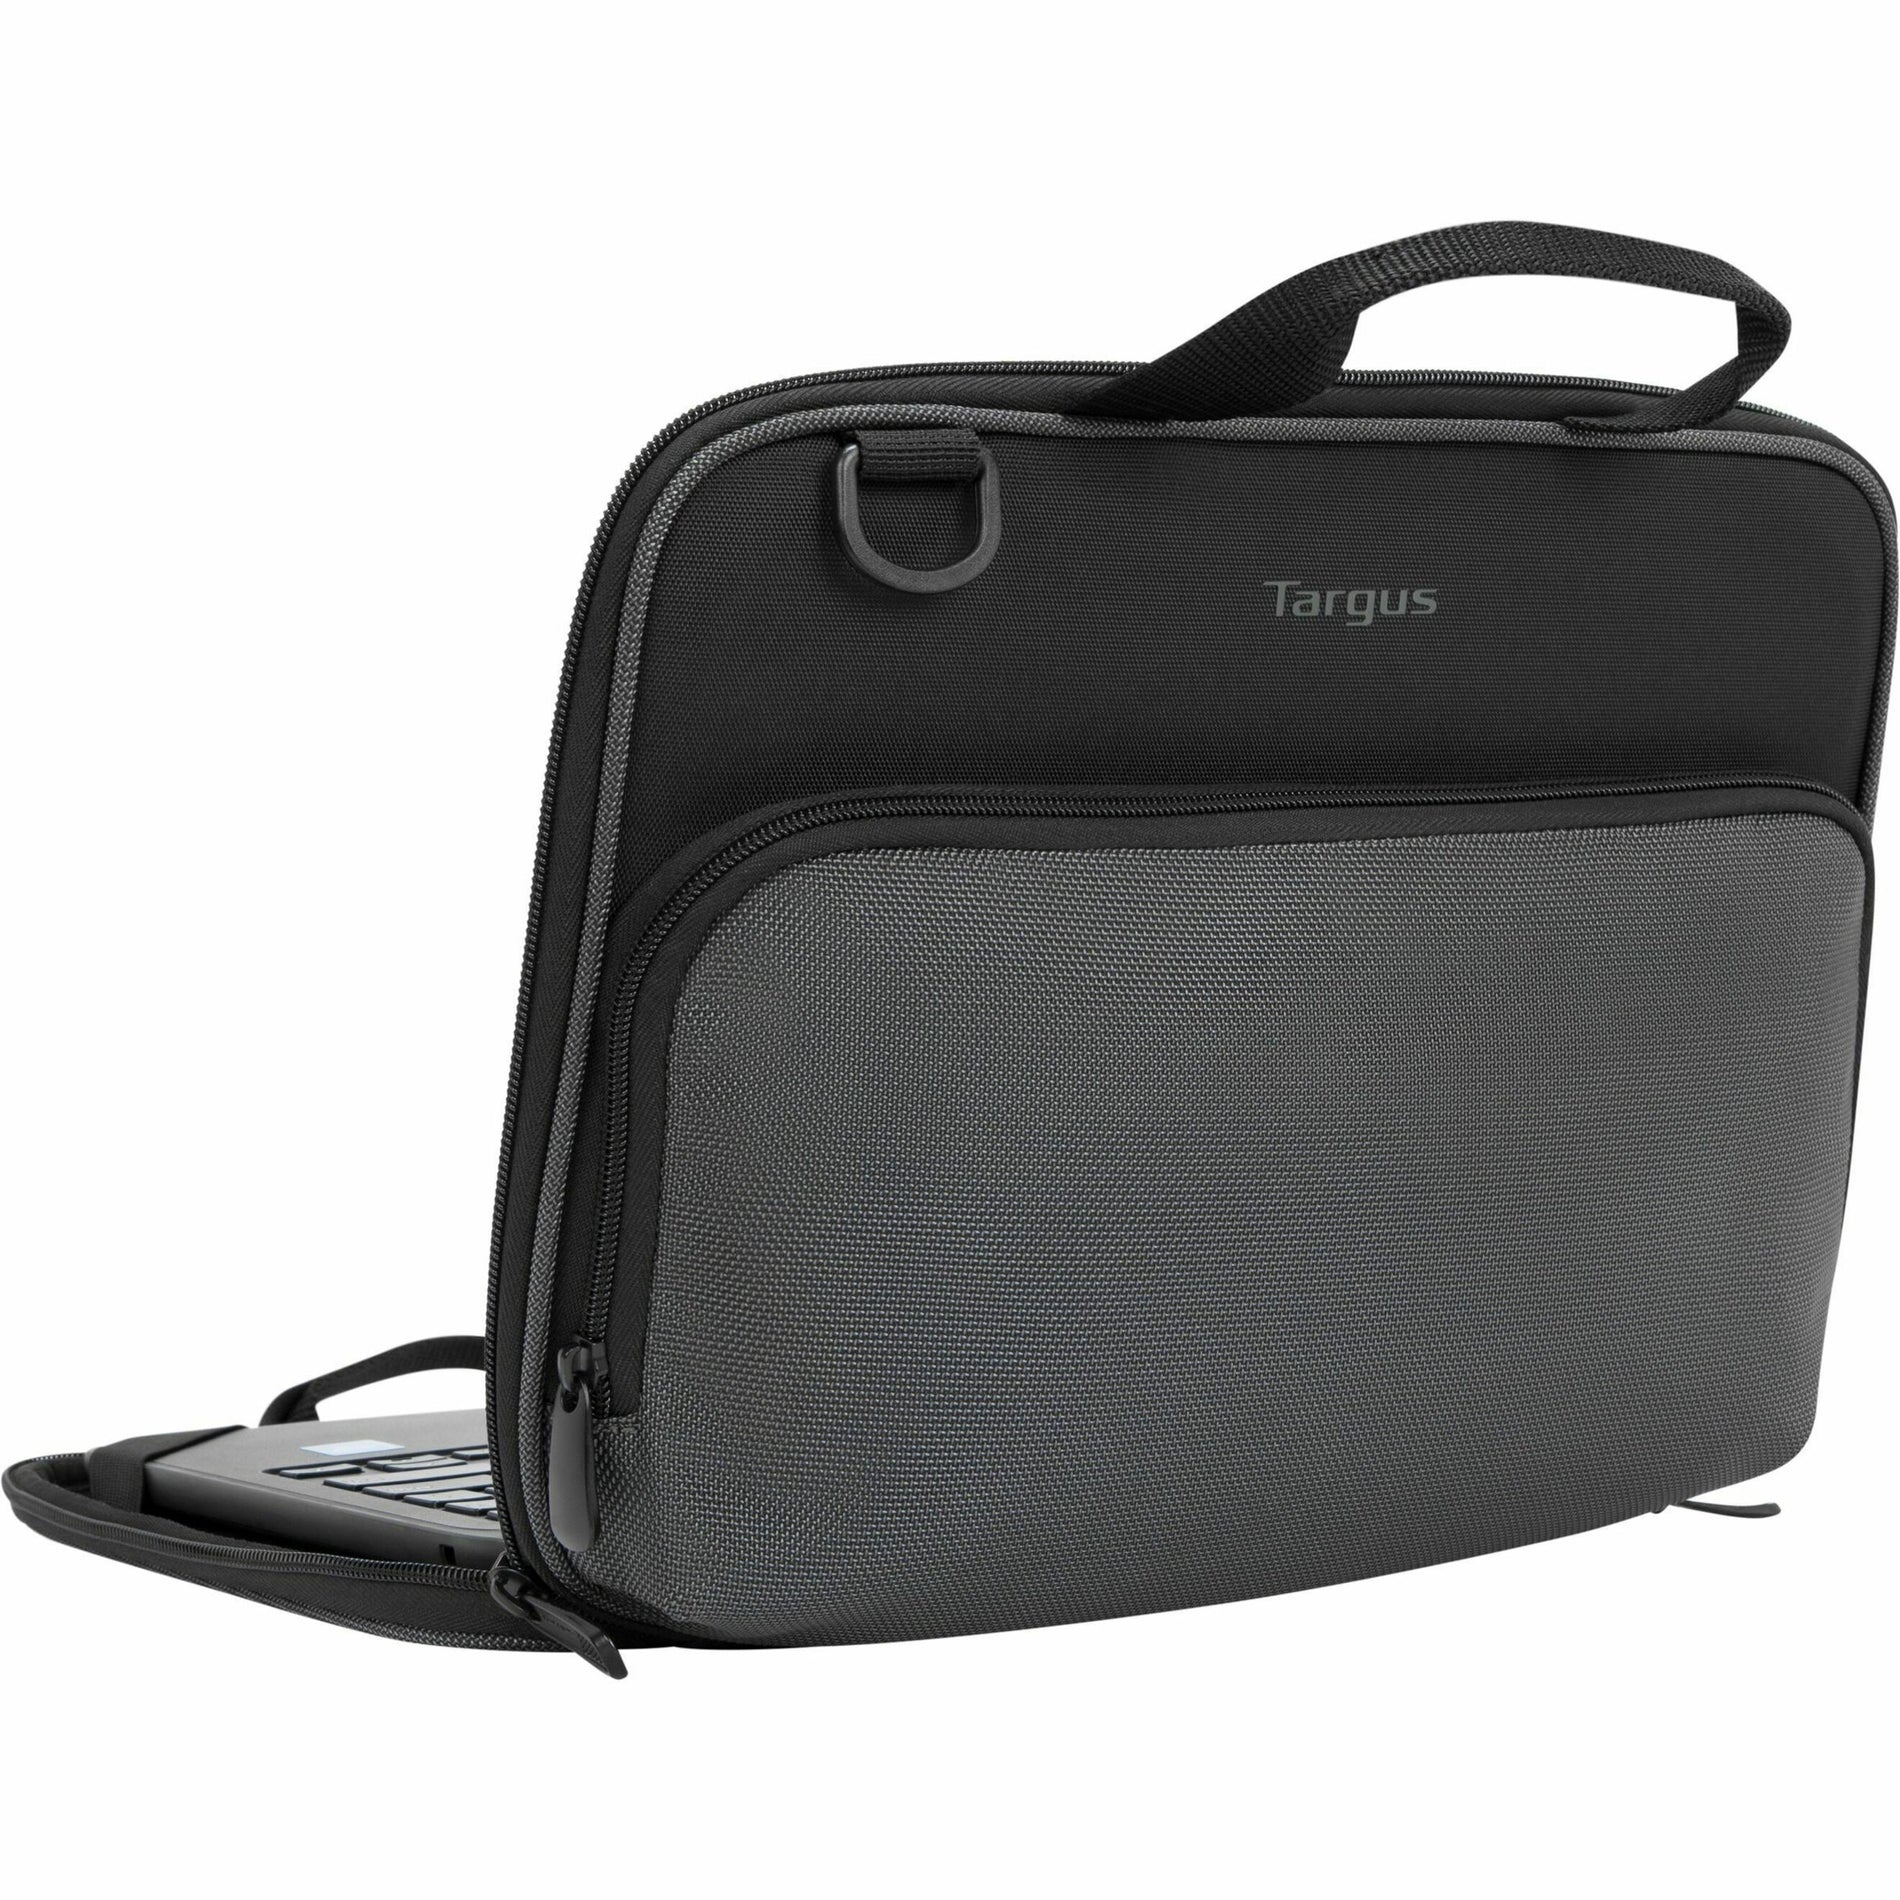 Targus TED006GL 11.6" Work-in Essentials Case for Chromebook - Black/Grey, Lightweight and Durable Carrying Case for Accessories and Power Adapter